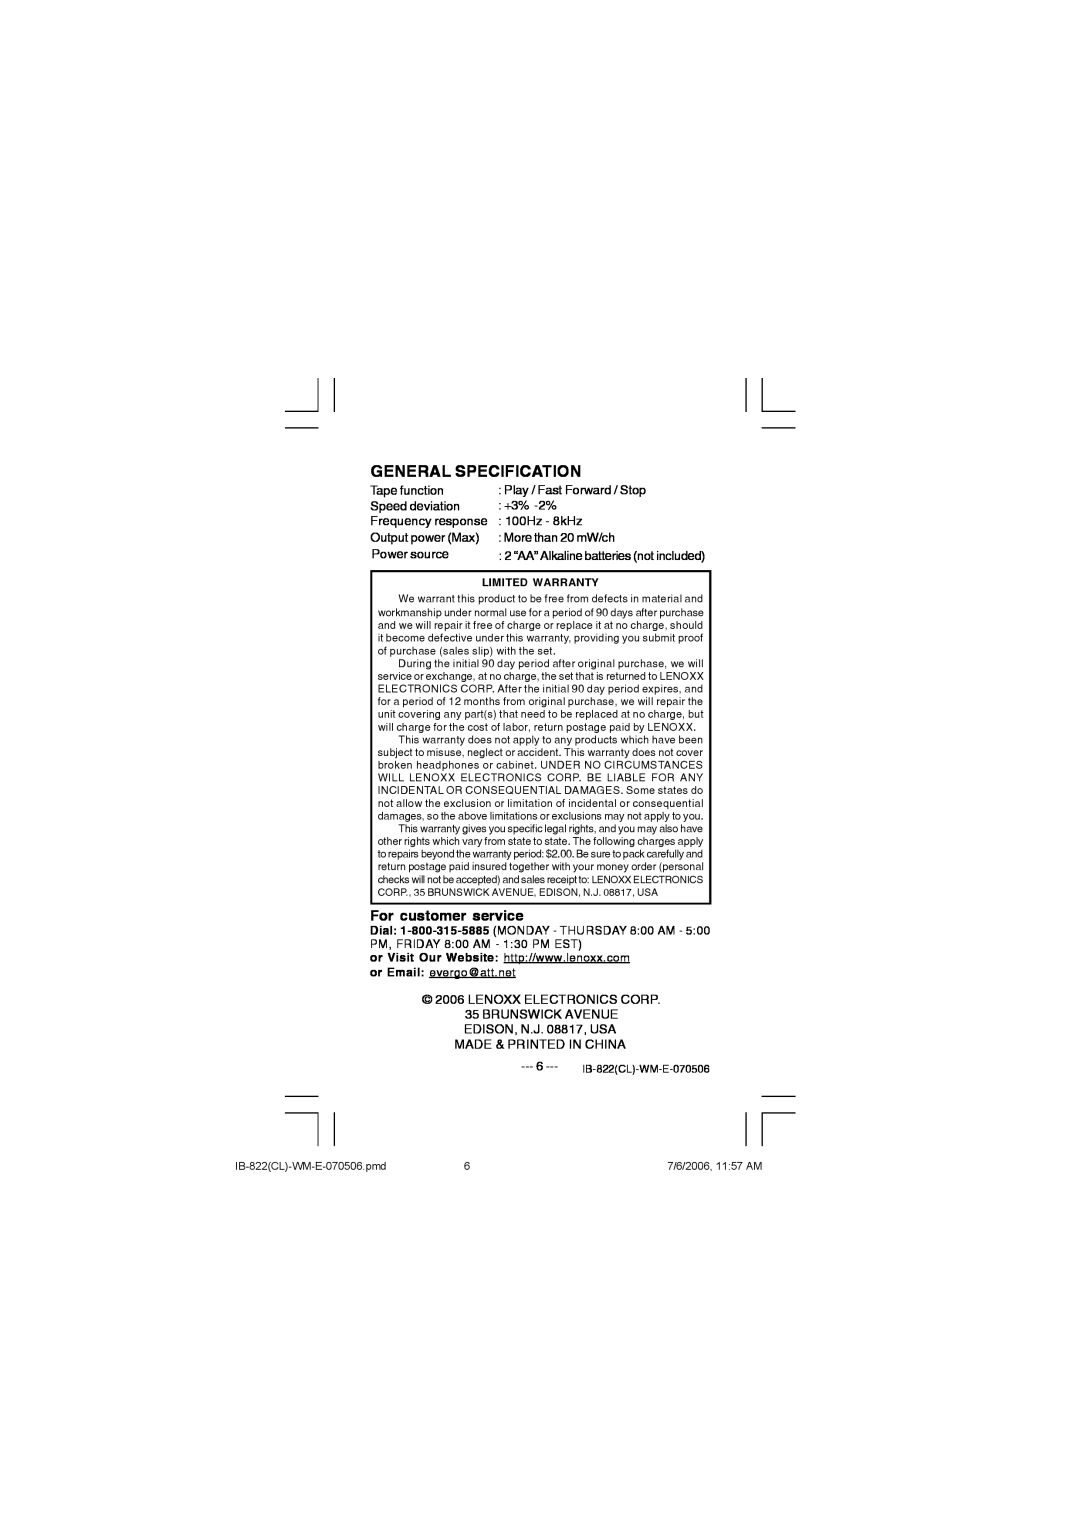 Lenoxx Electronics 822 manual General Specification, For customer service 